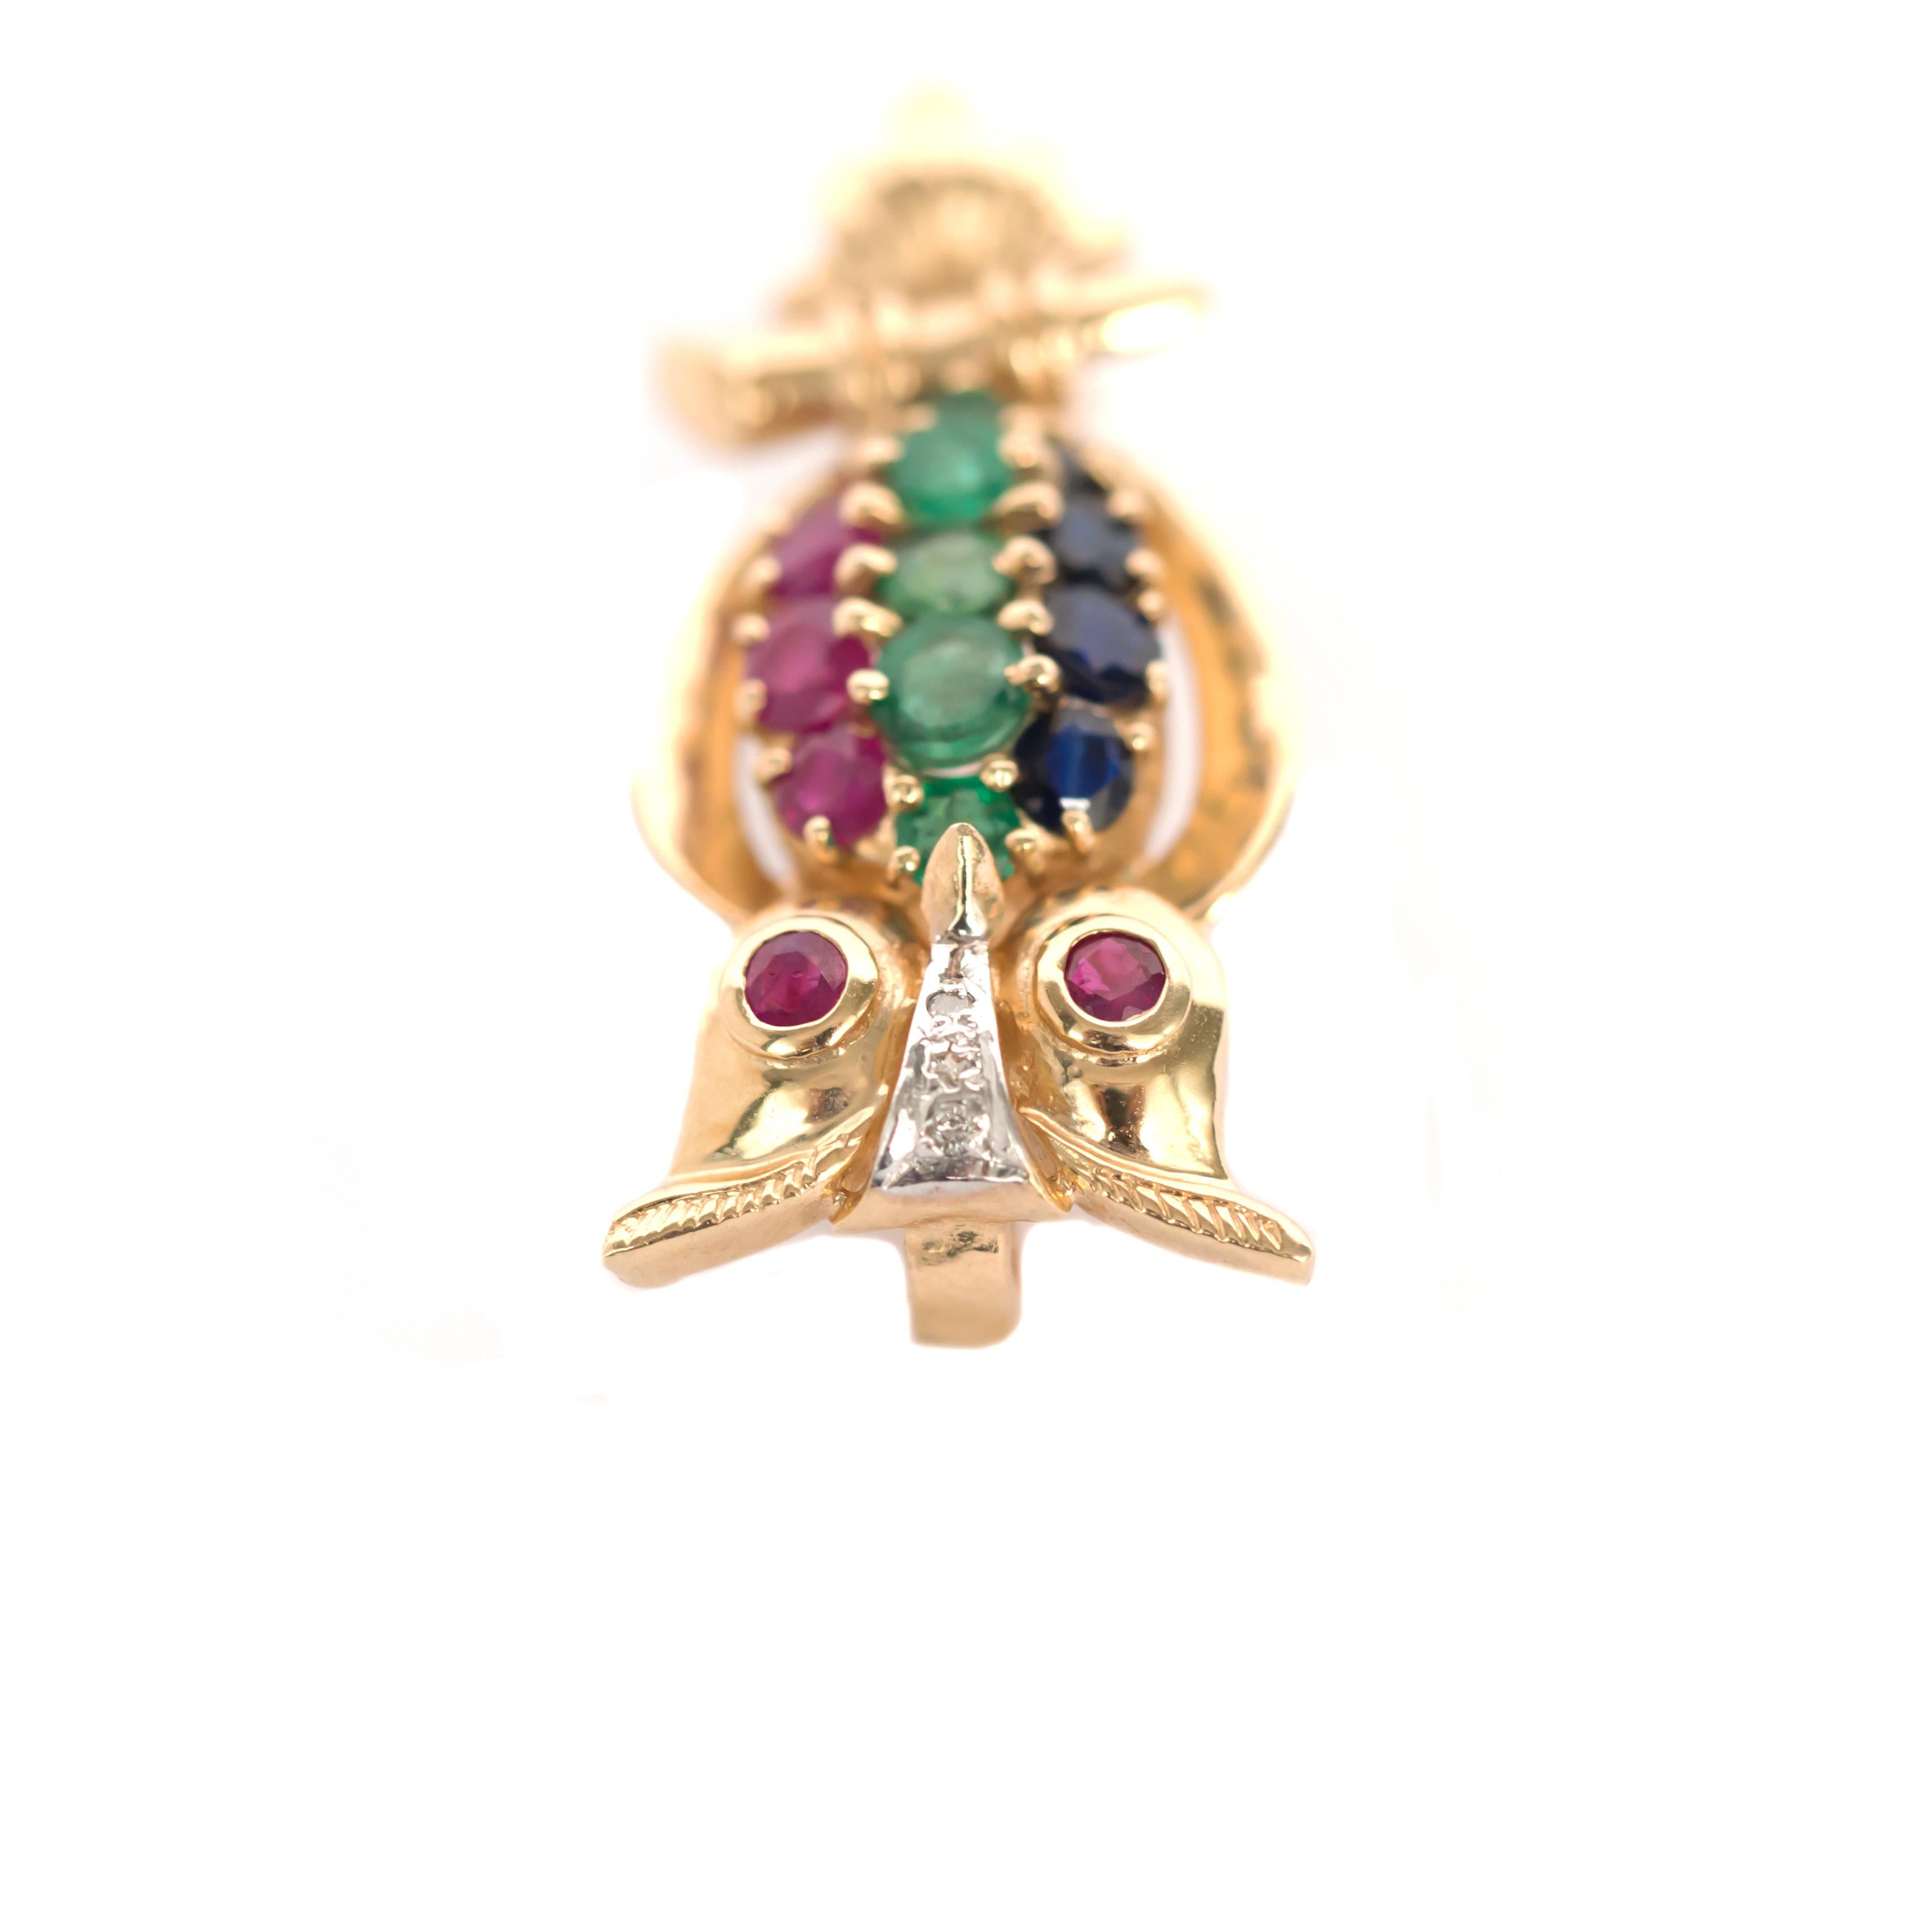 Item Details: 
Length: 1 Inch
Metal Type: 14 karat Yellow Gold
Weight: 4.7 grams

Color Stone Details: 
Type: Ruby, Emerald, Sapphire
Carat Weight: .75 carat, total weight.


Finger to Top of Stone Measurement: 4.34mm